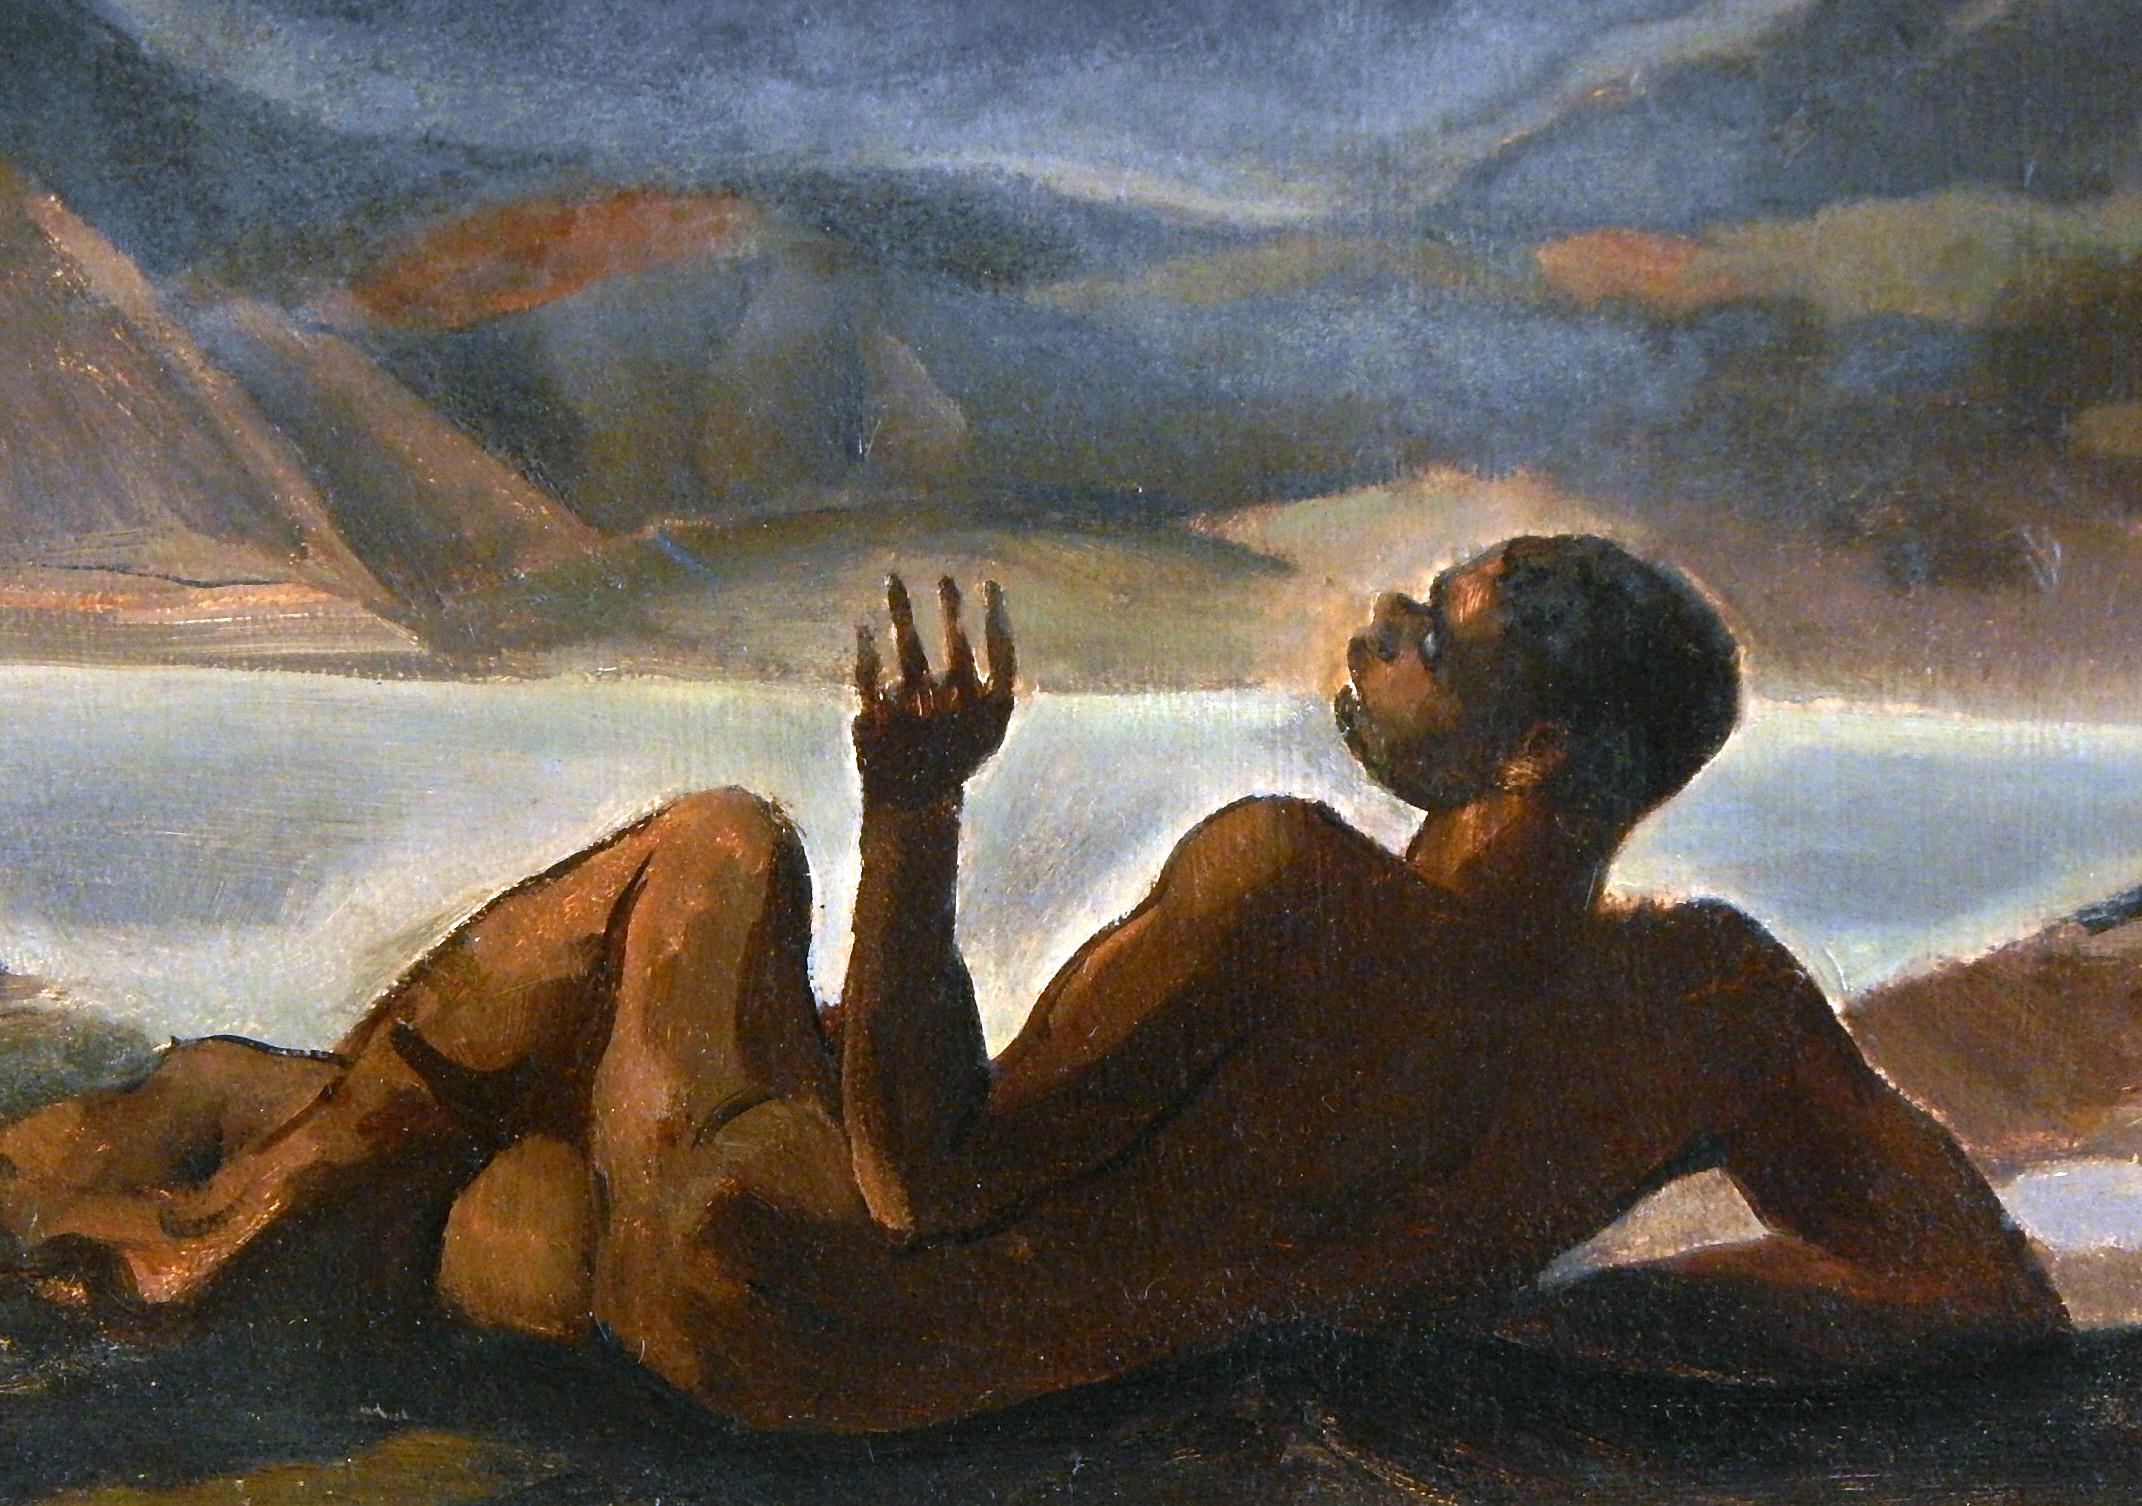 Although not signed, this brilliant scene of a nude black male figure, marvelling at a vision of angels in the heaven from his position on the ground below, is reminiscent of the early work of African American artists such as Robert Neal, James Amos